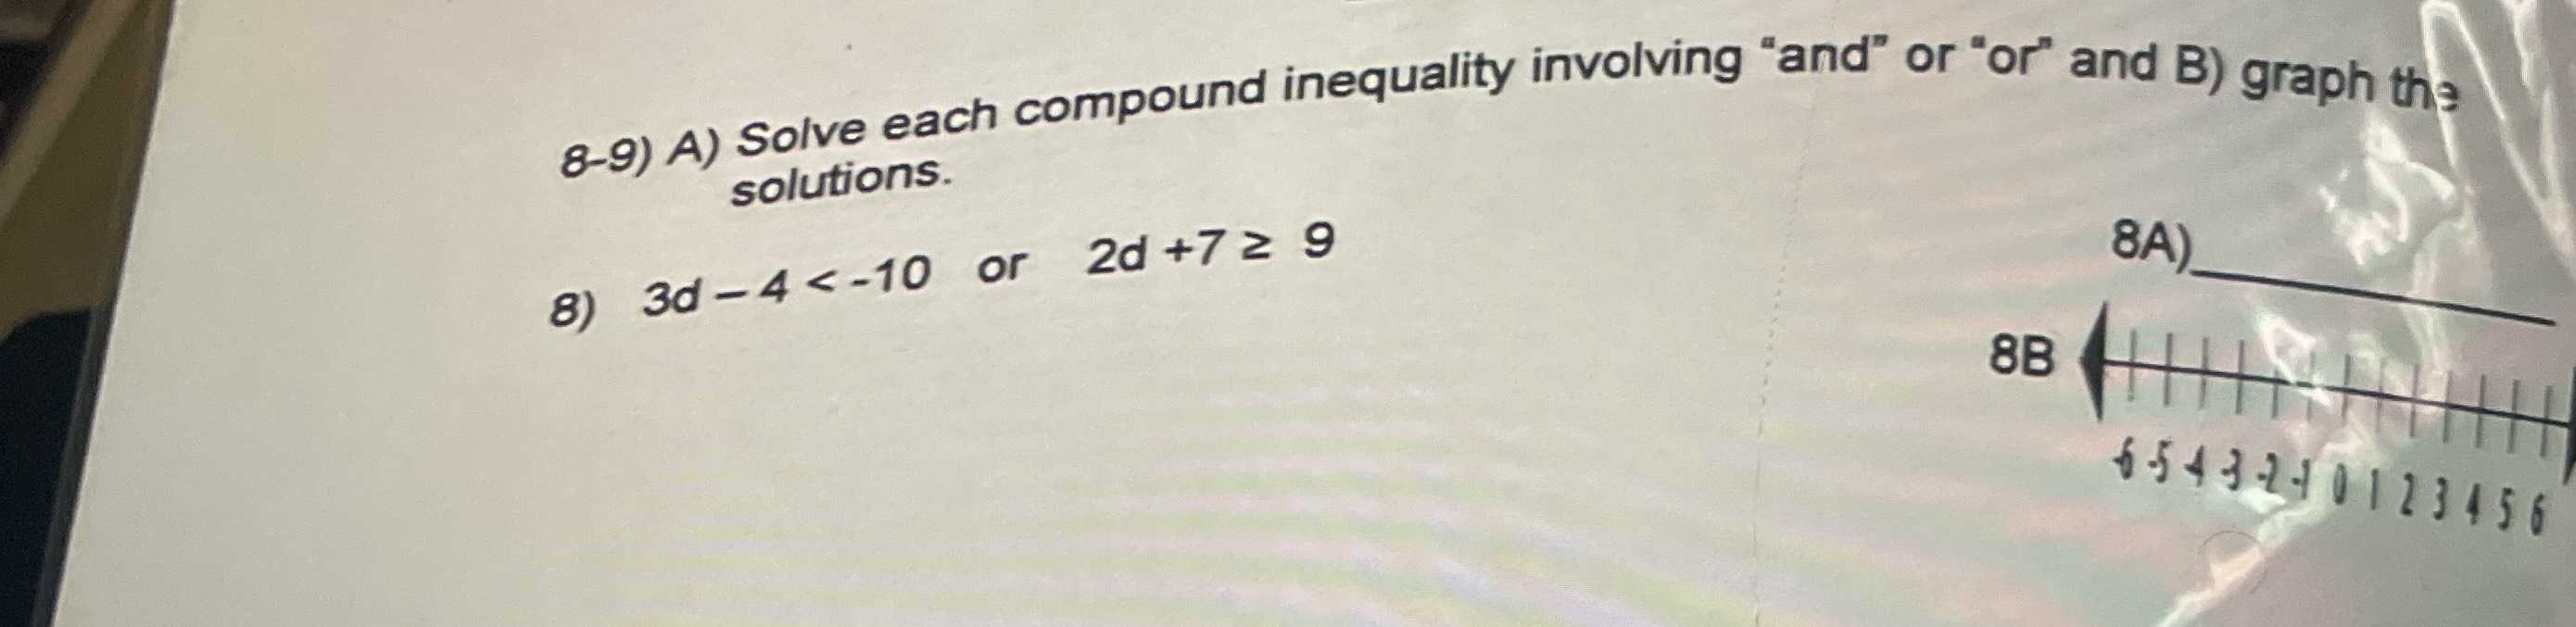 8-9) A) Solve each compound inequality involving